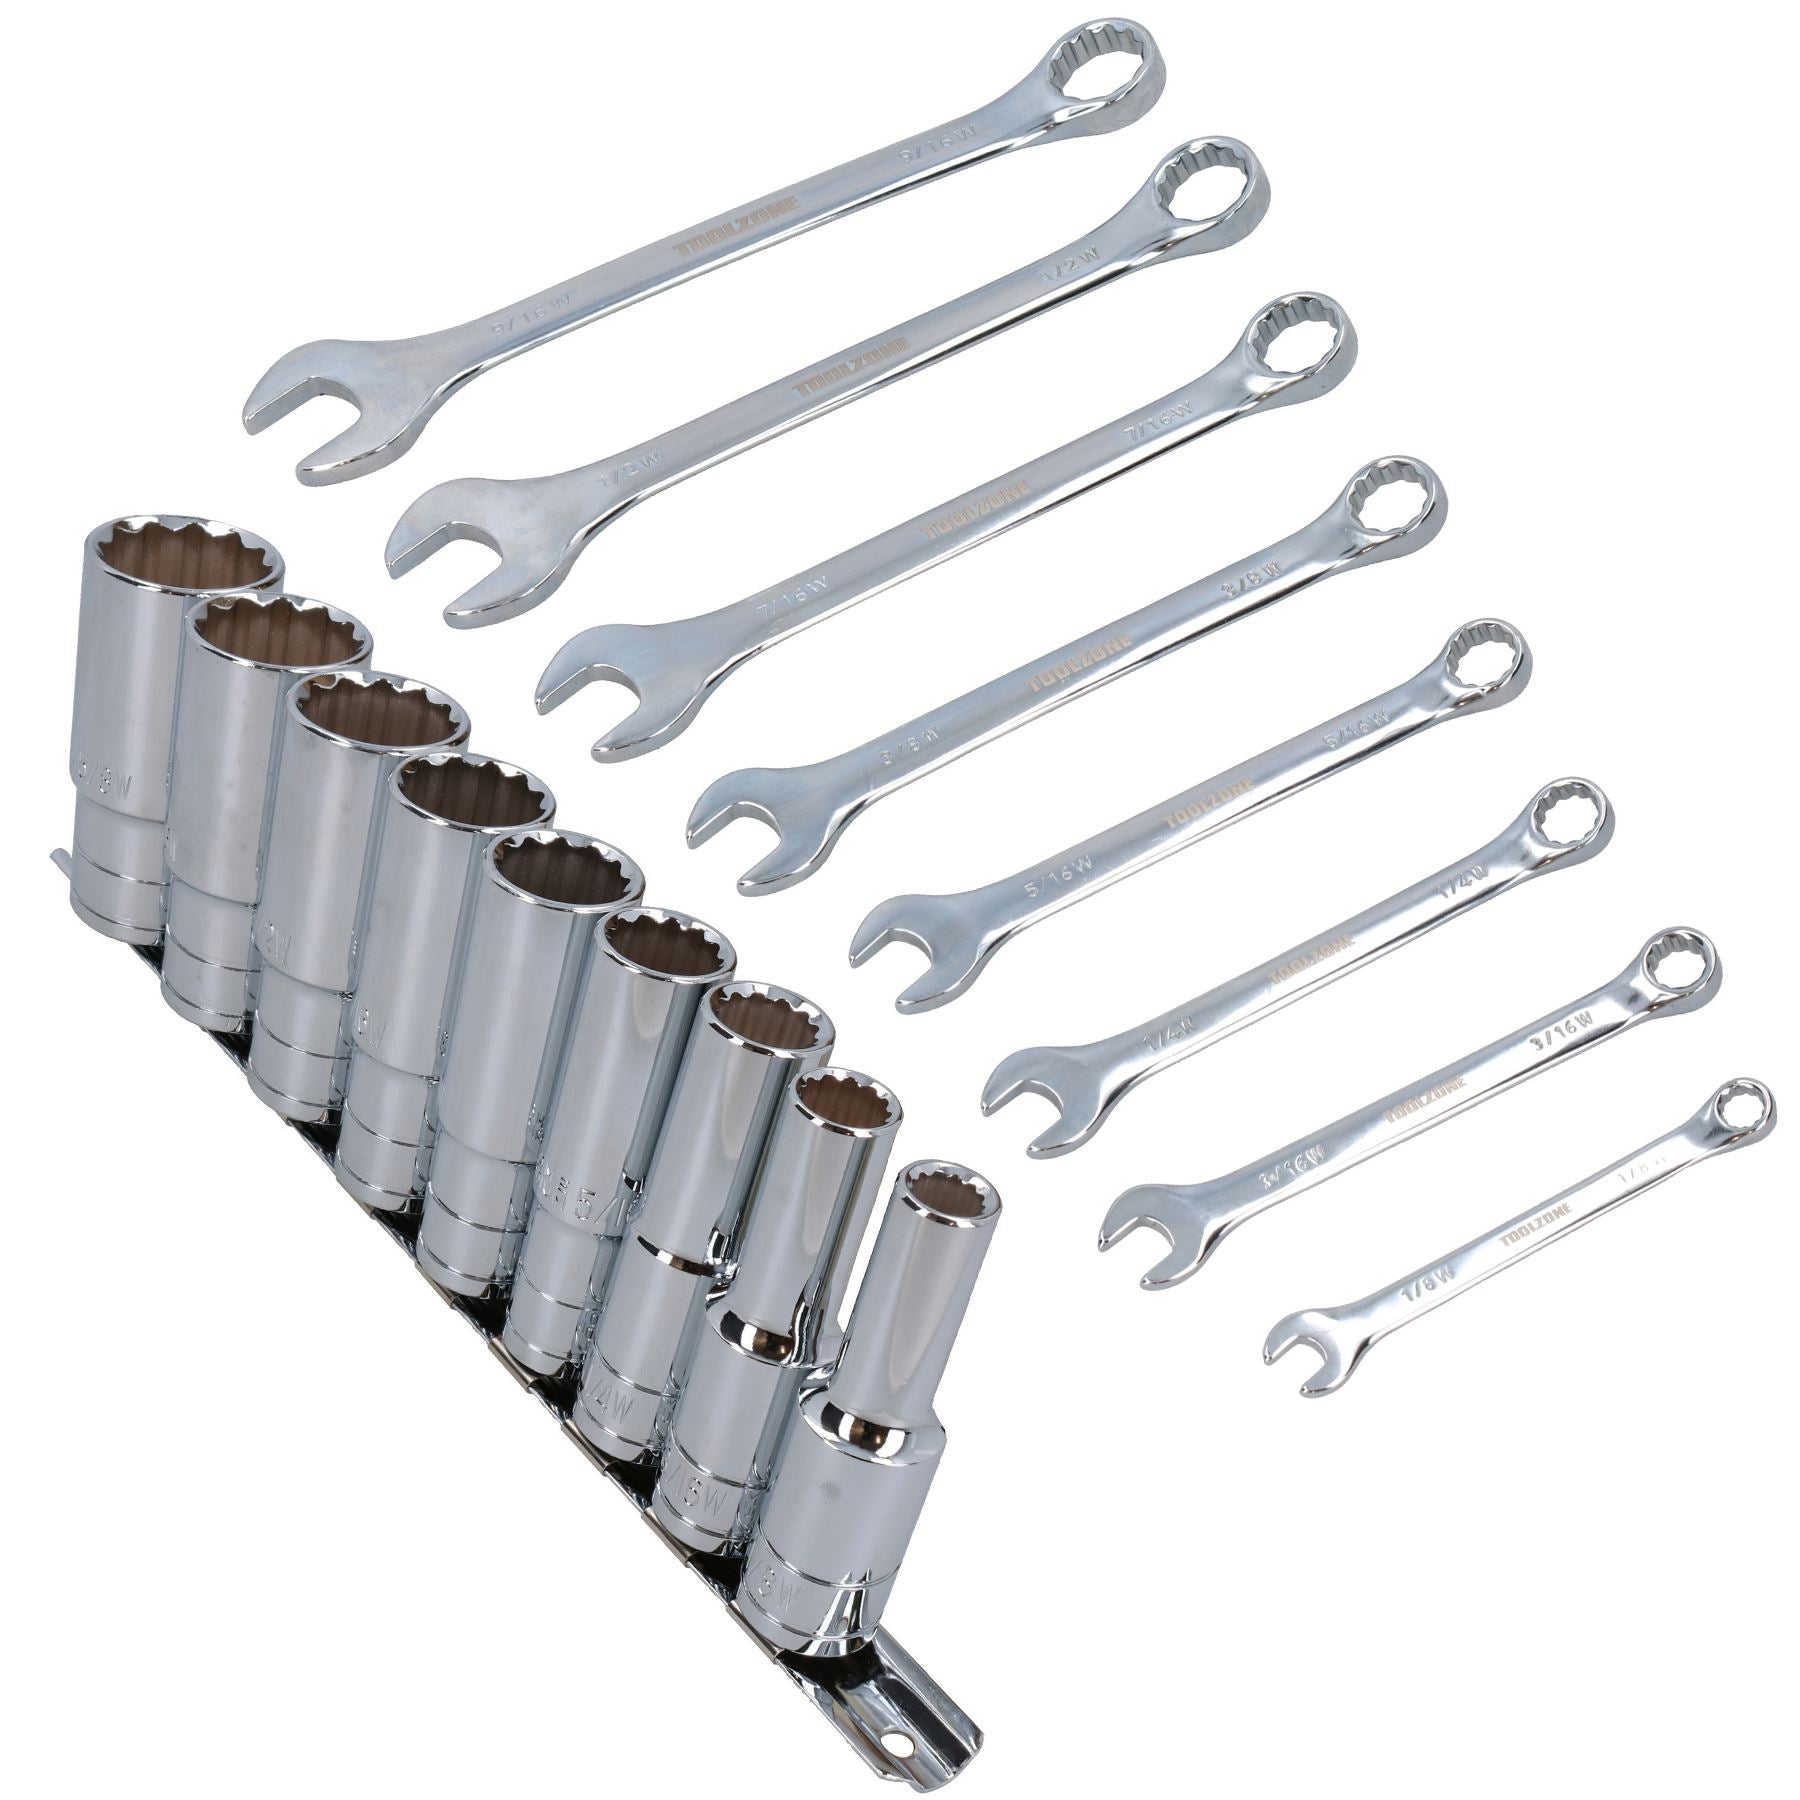 BSW British Whitworth Combination Spanner Wrench + Deep Sockets 17pc Set